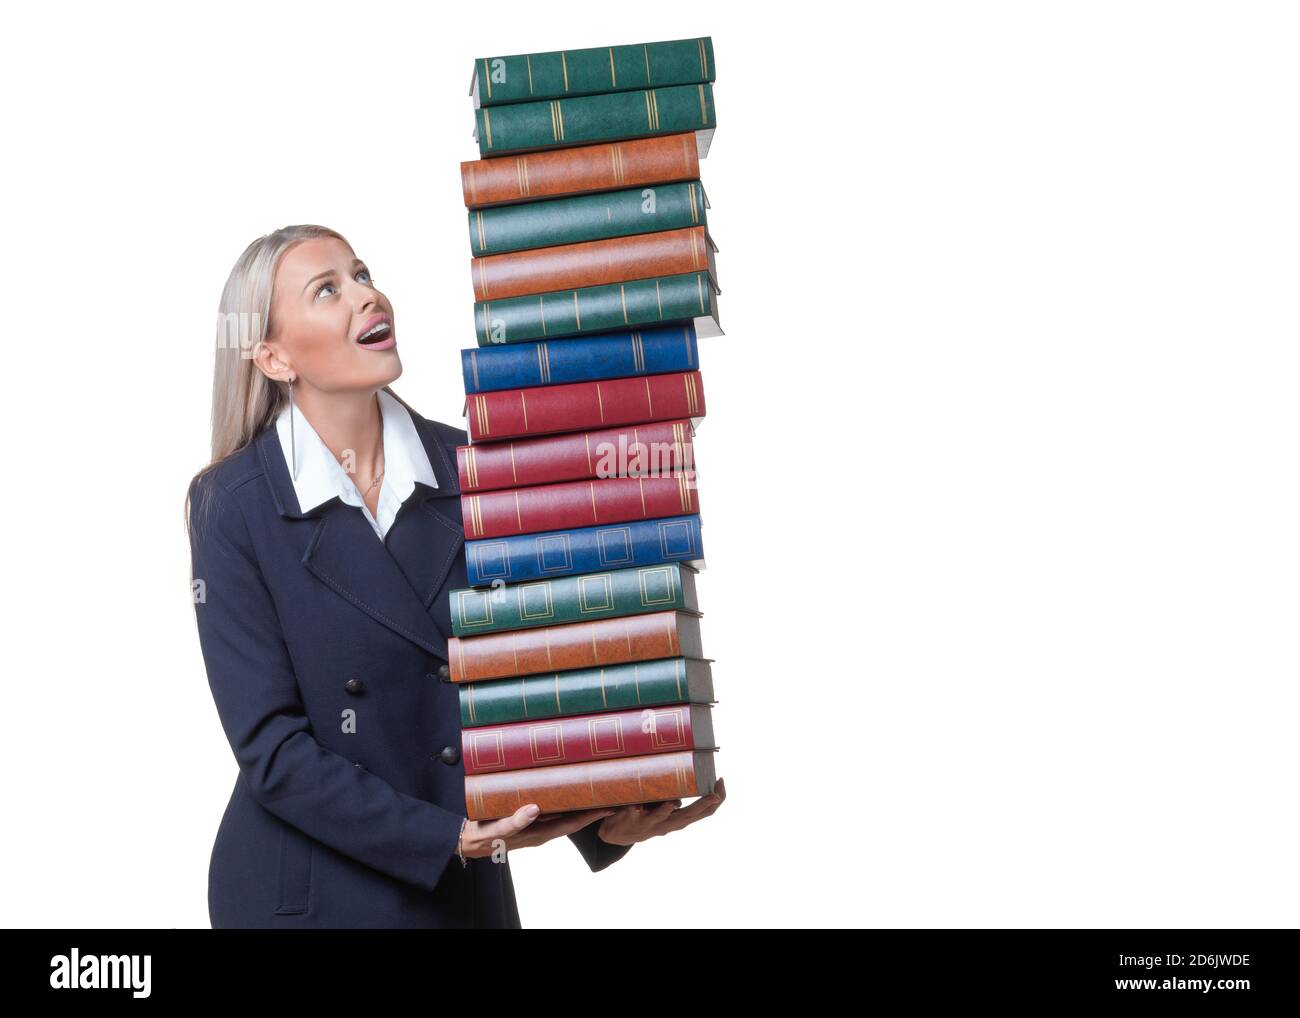 Smiley businesswoman or lawer holding a lot of books. Isolated on white background. Stock Photo